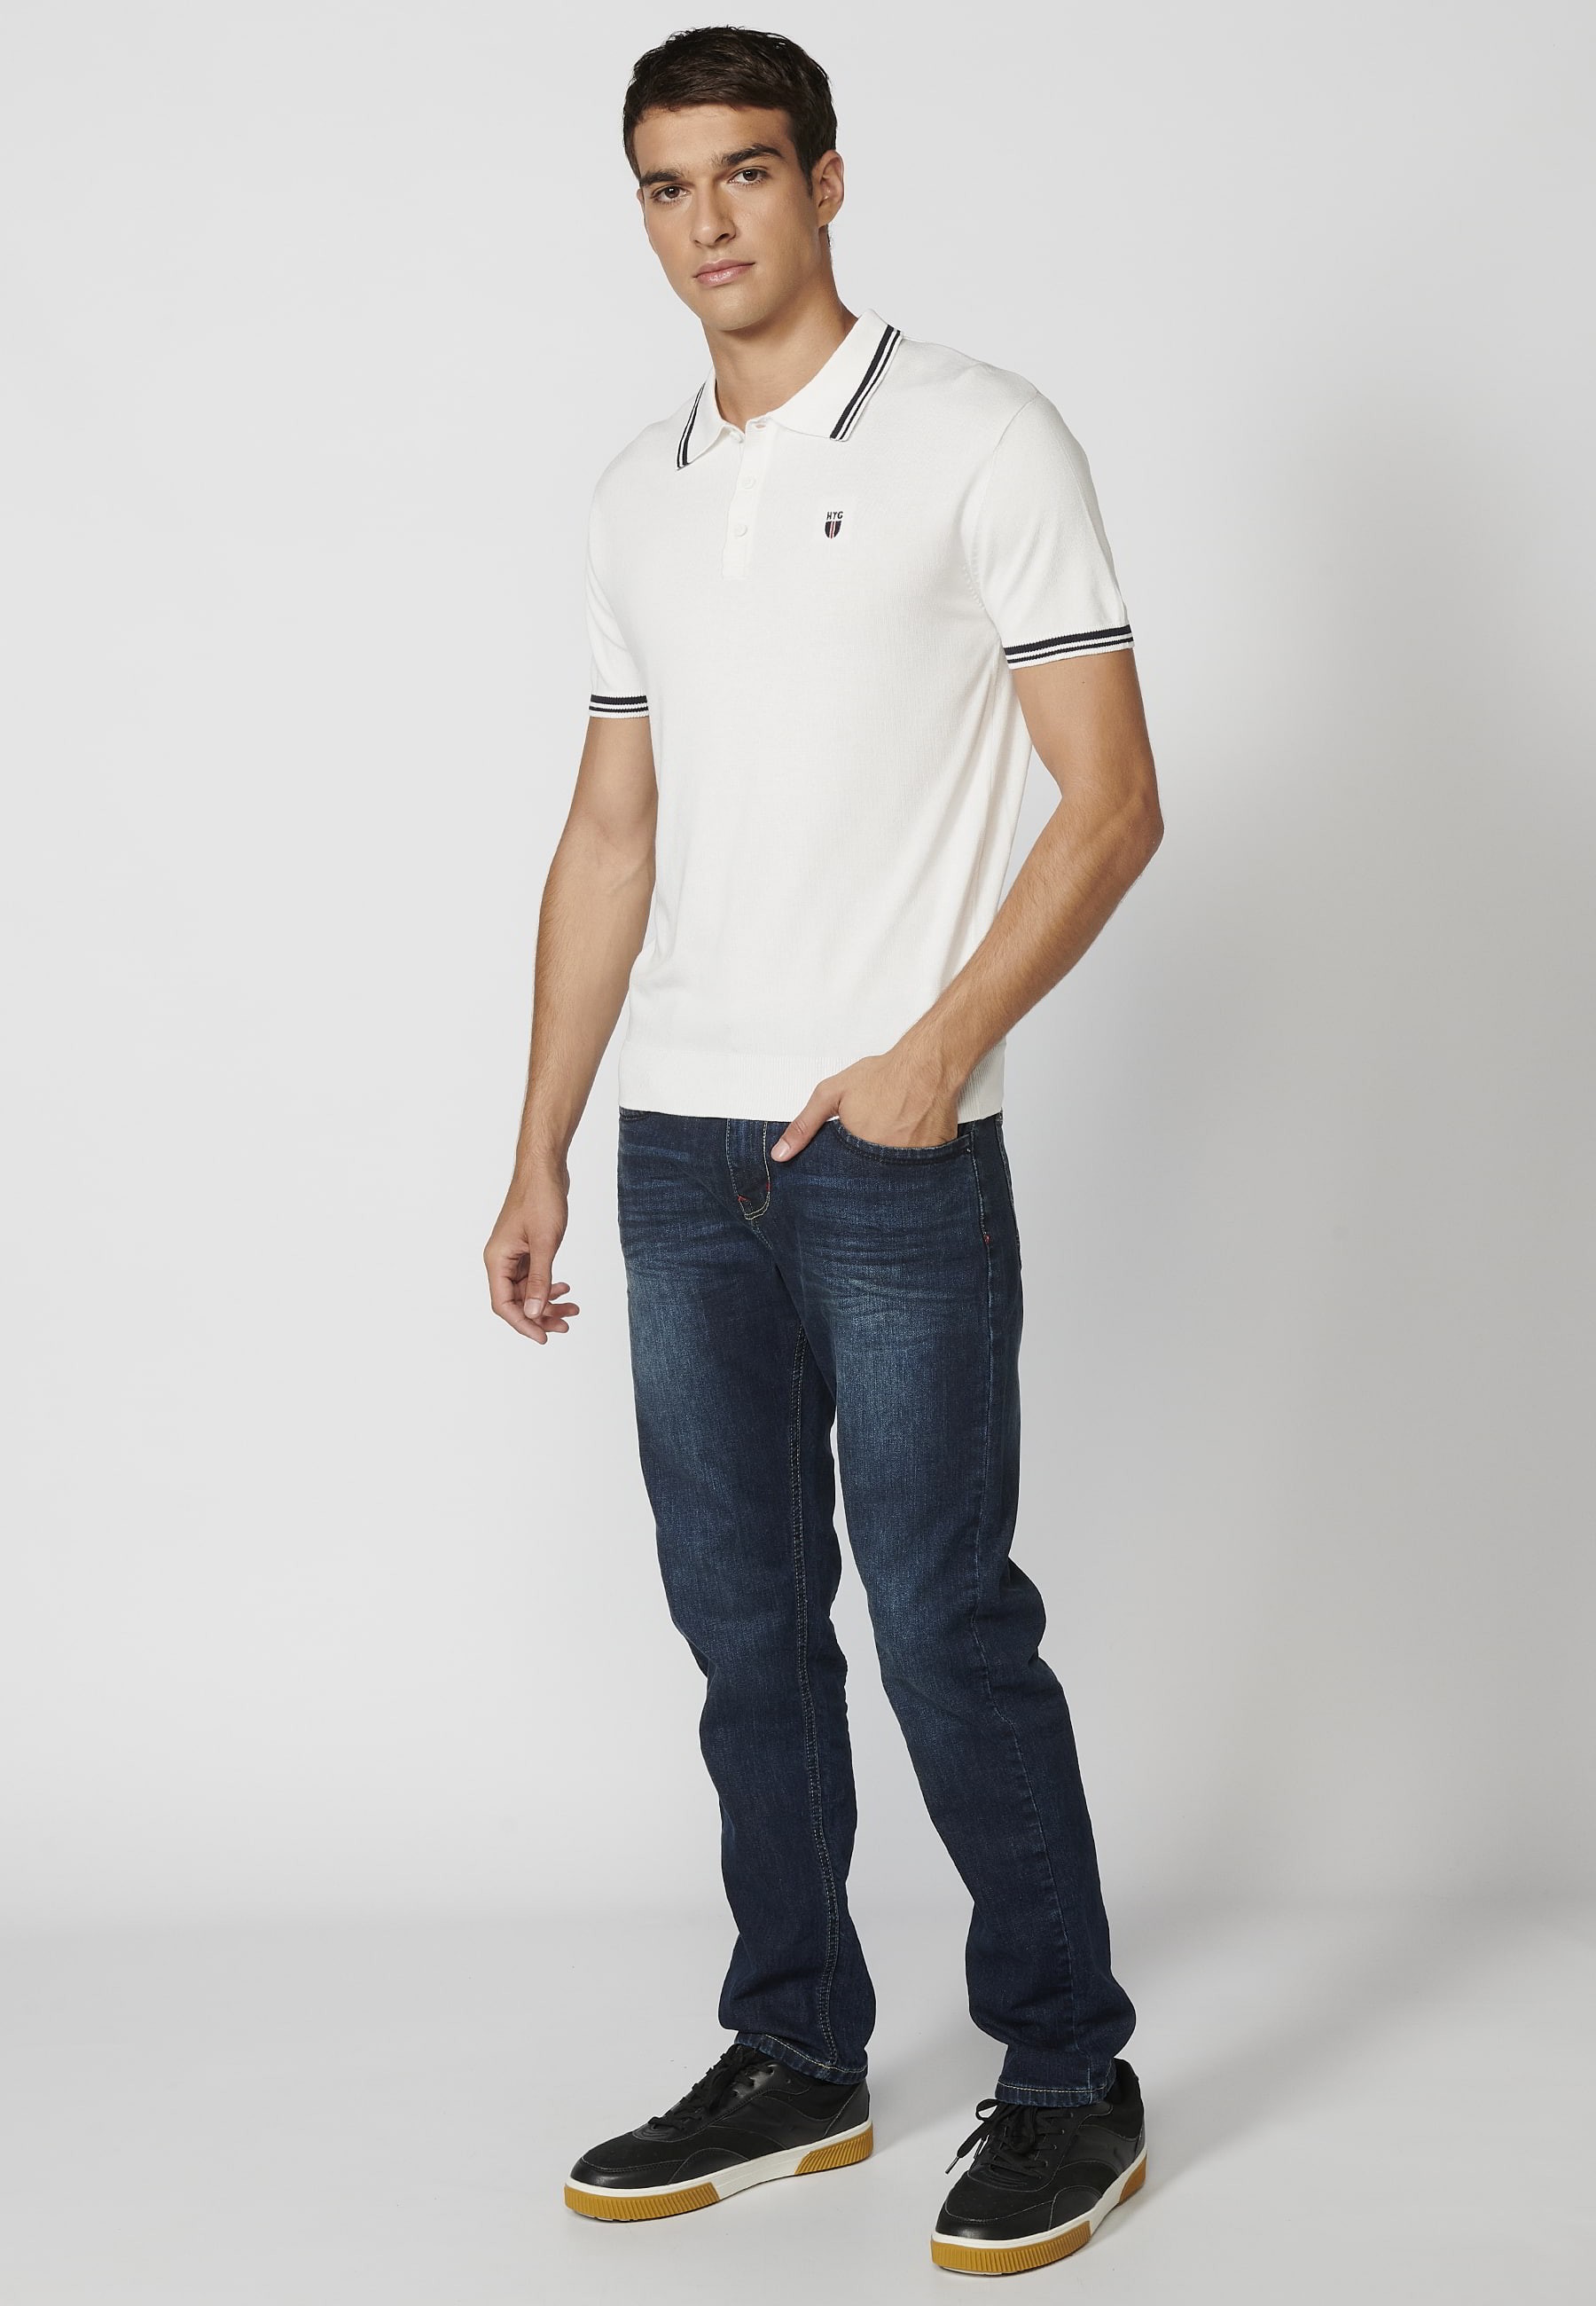 Short-sleeved knitted polo shirt with shirt collar in Ecru for Men